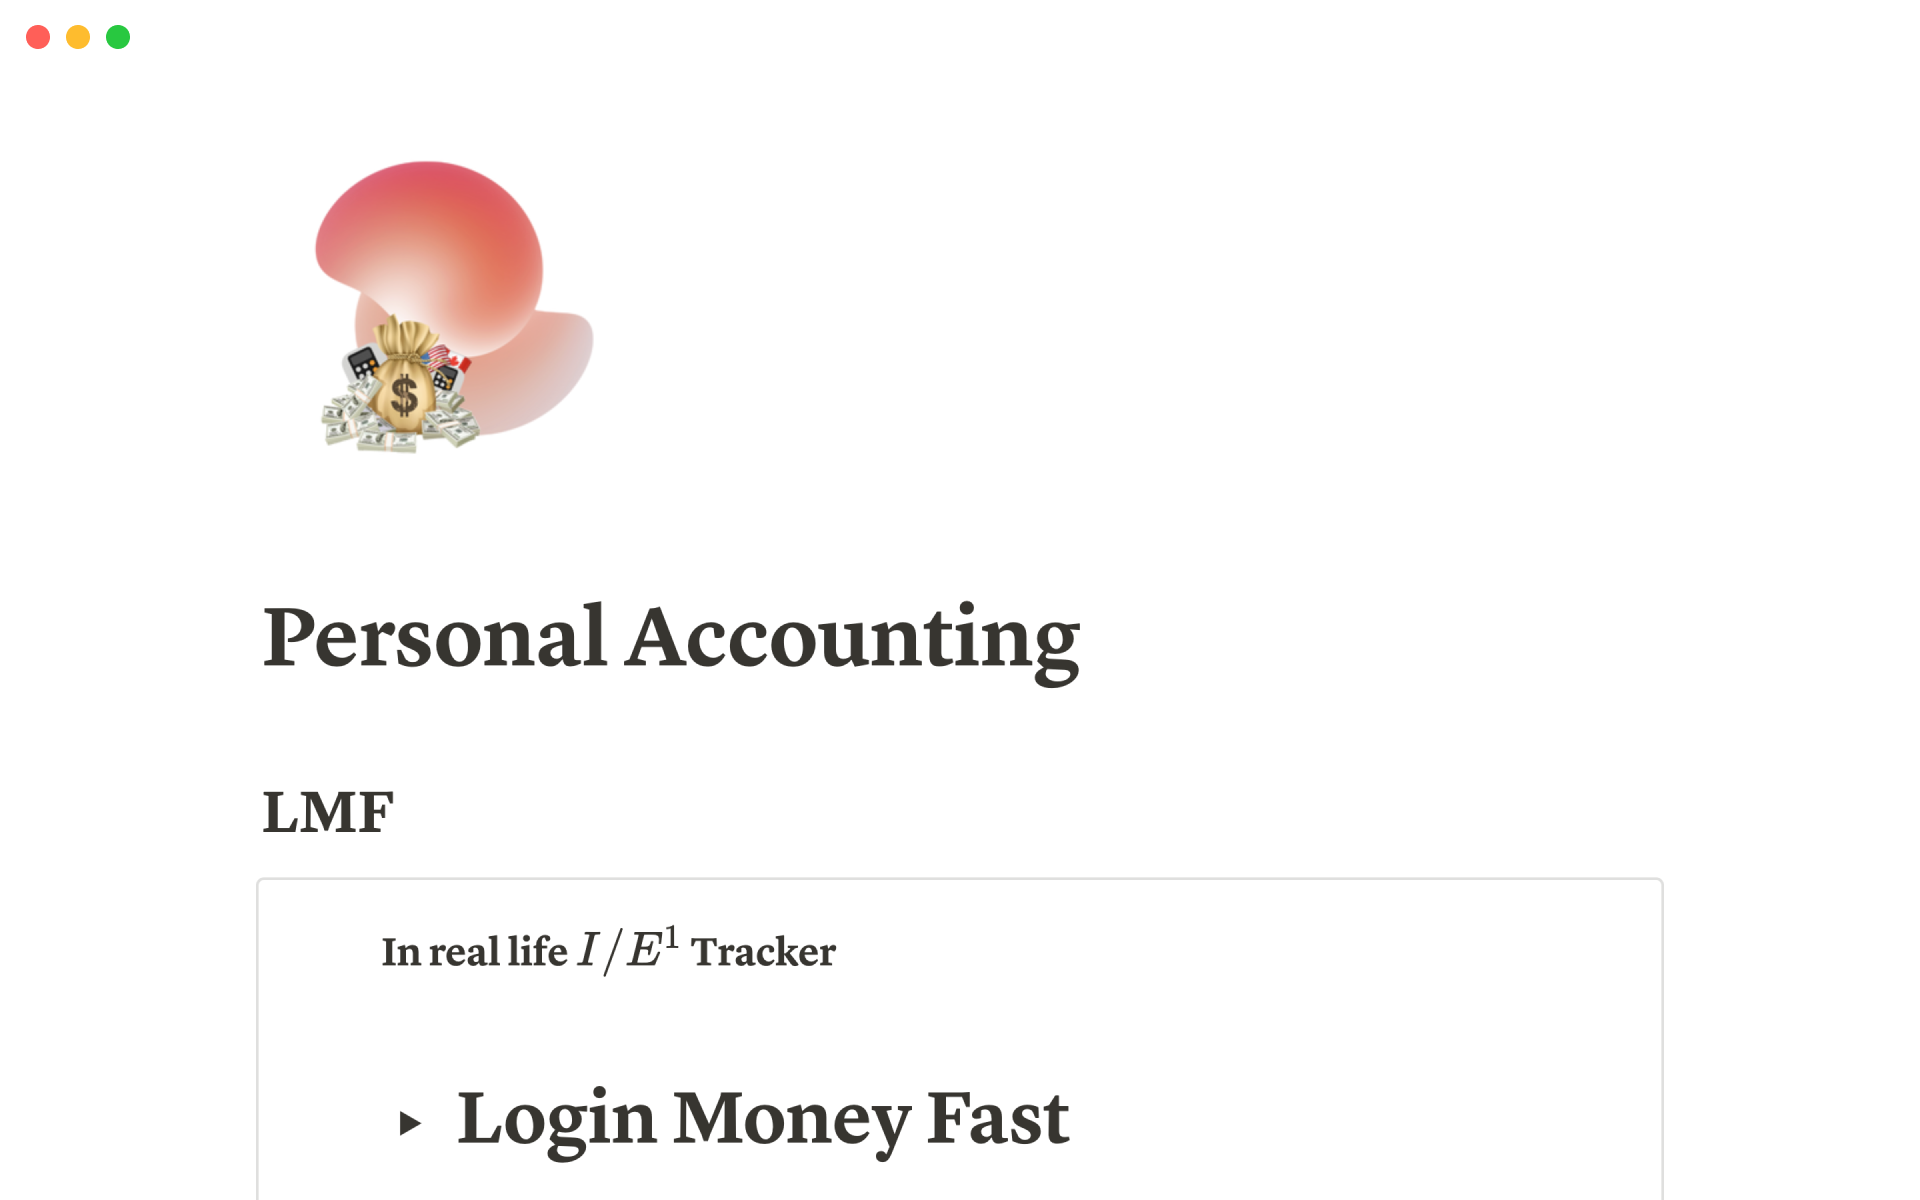 Tracking your money is good, tracking your money, including taxes, is even better.